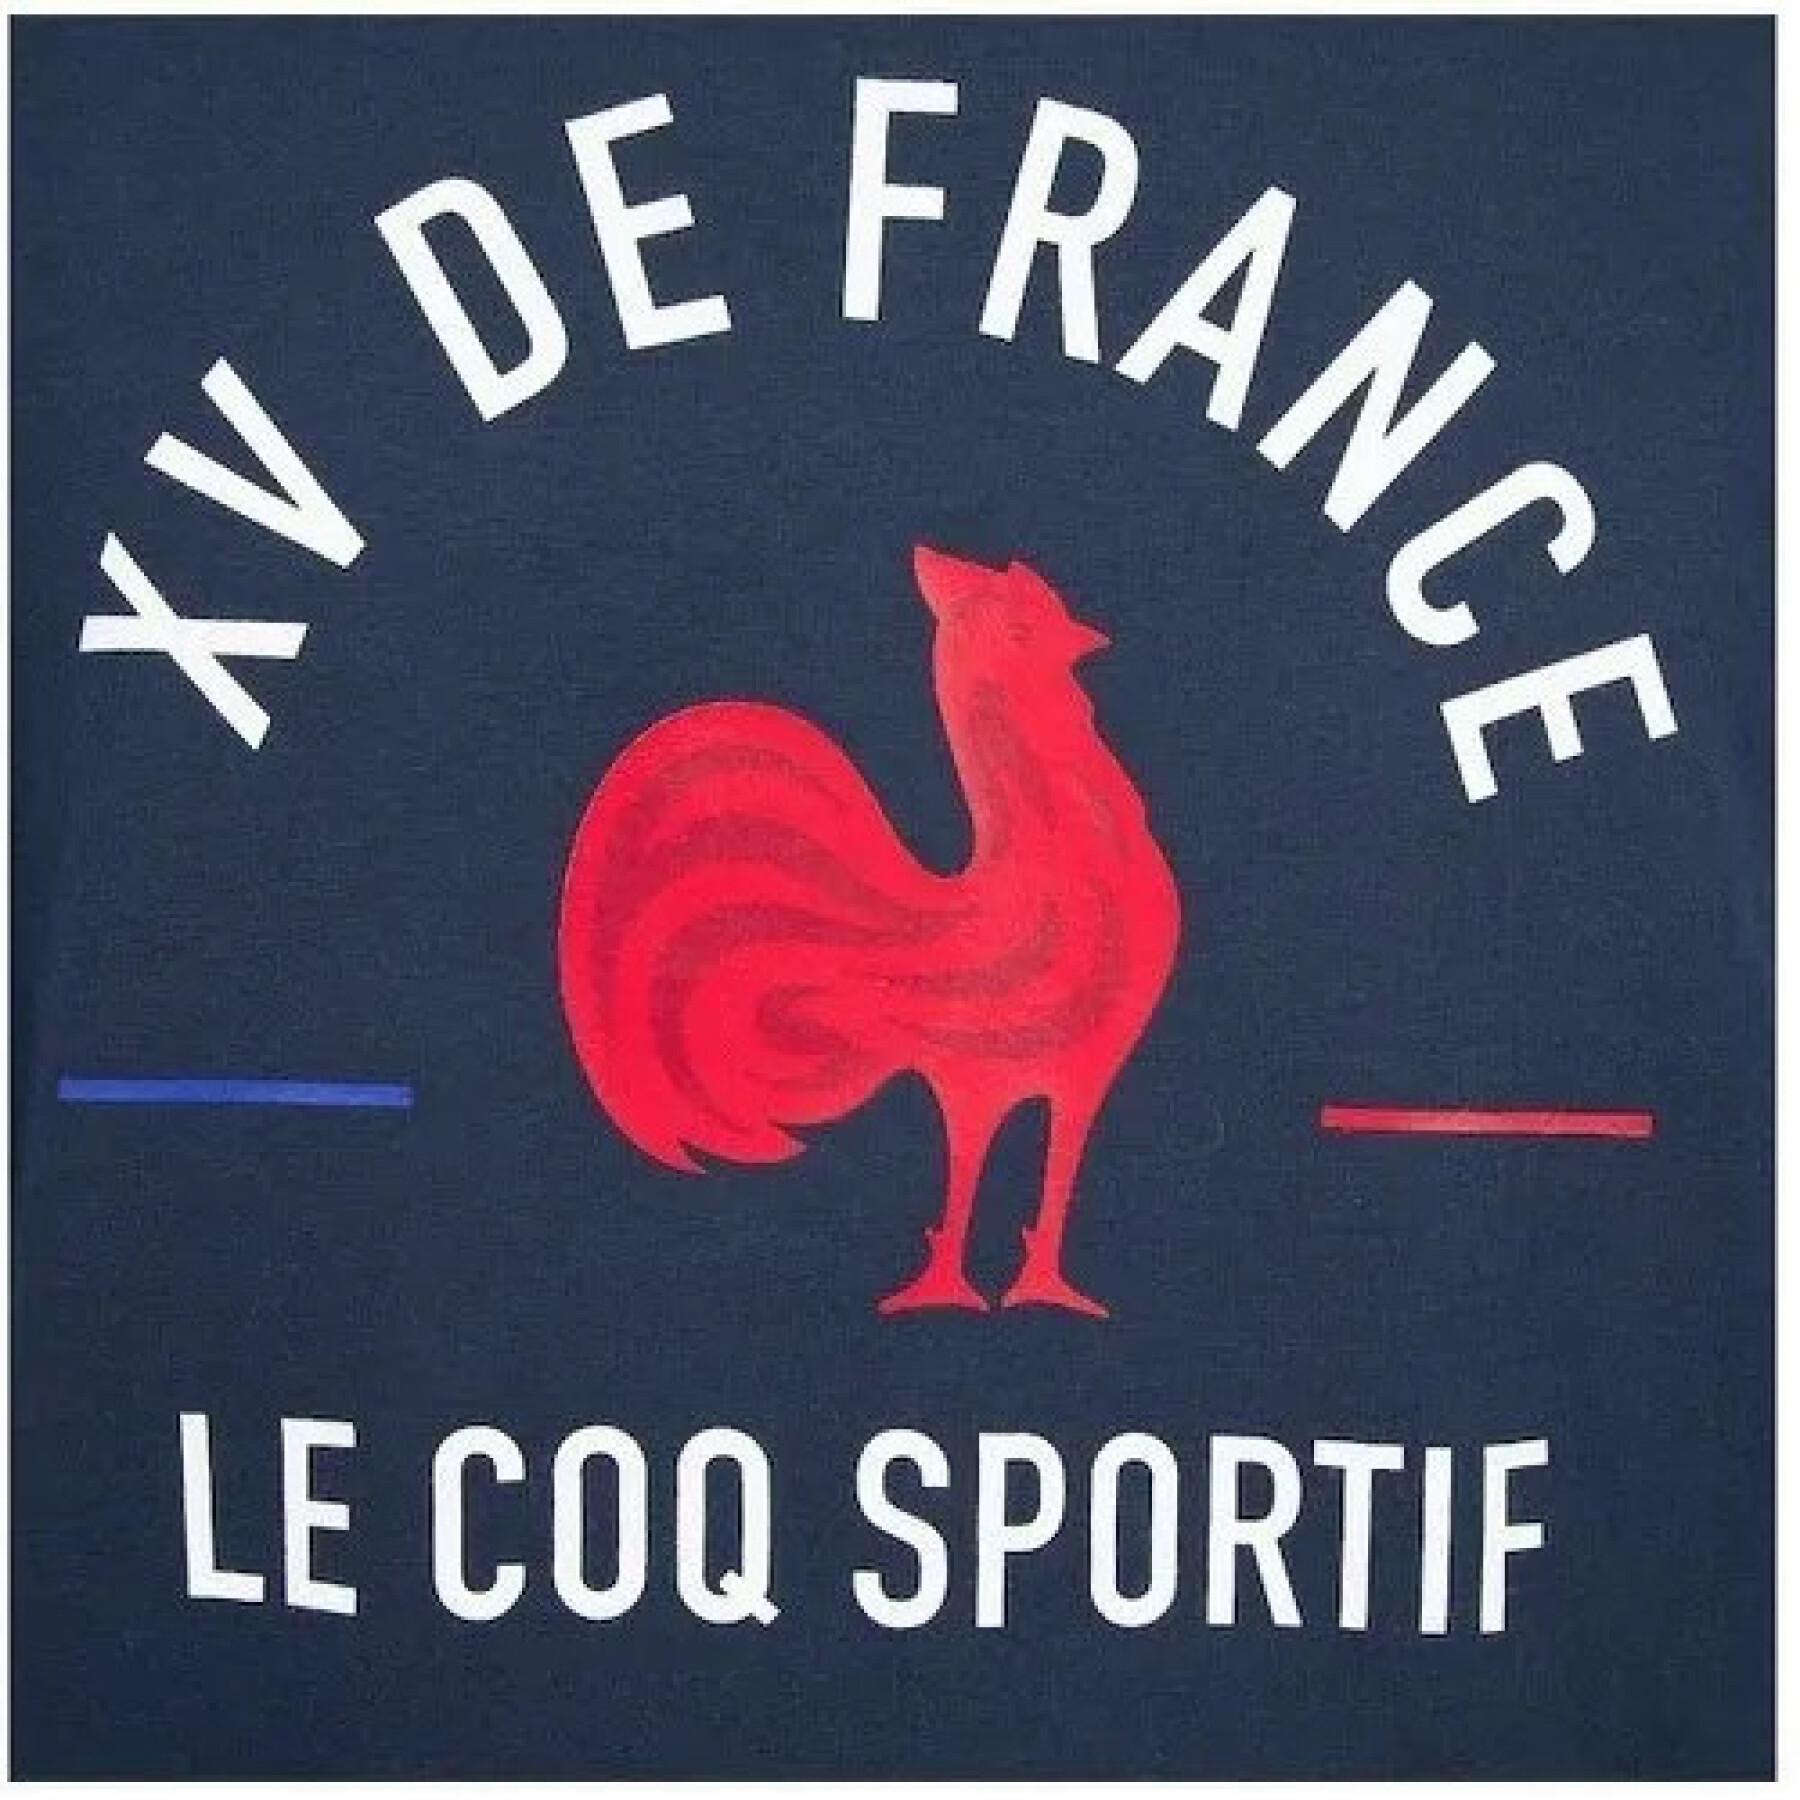 xv hoodie from France 2021/22